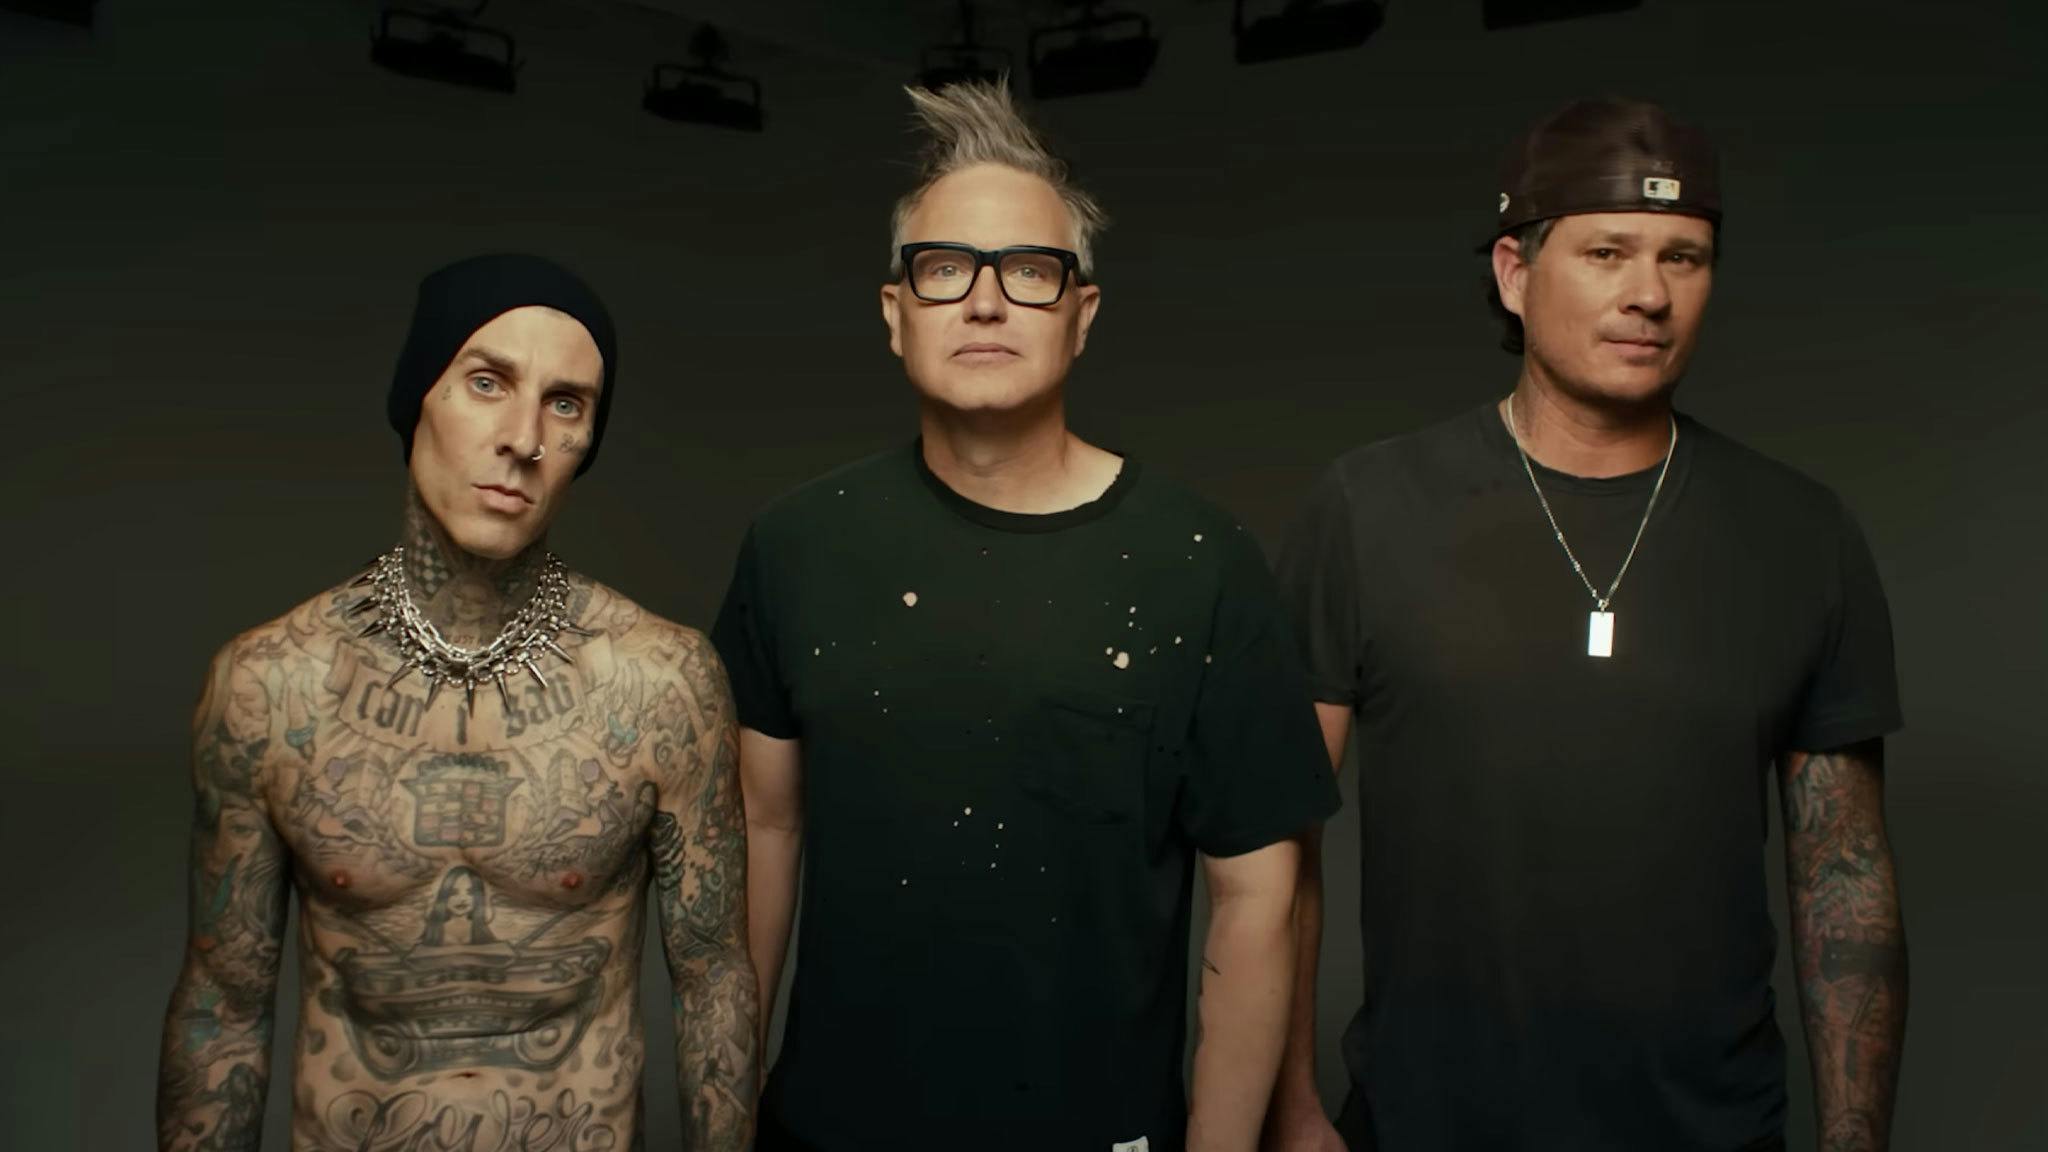 Tom DeLonge says the new blink-182 album is imminent: “We are finally here”